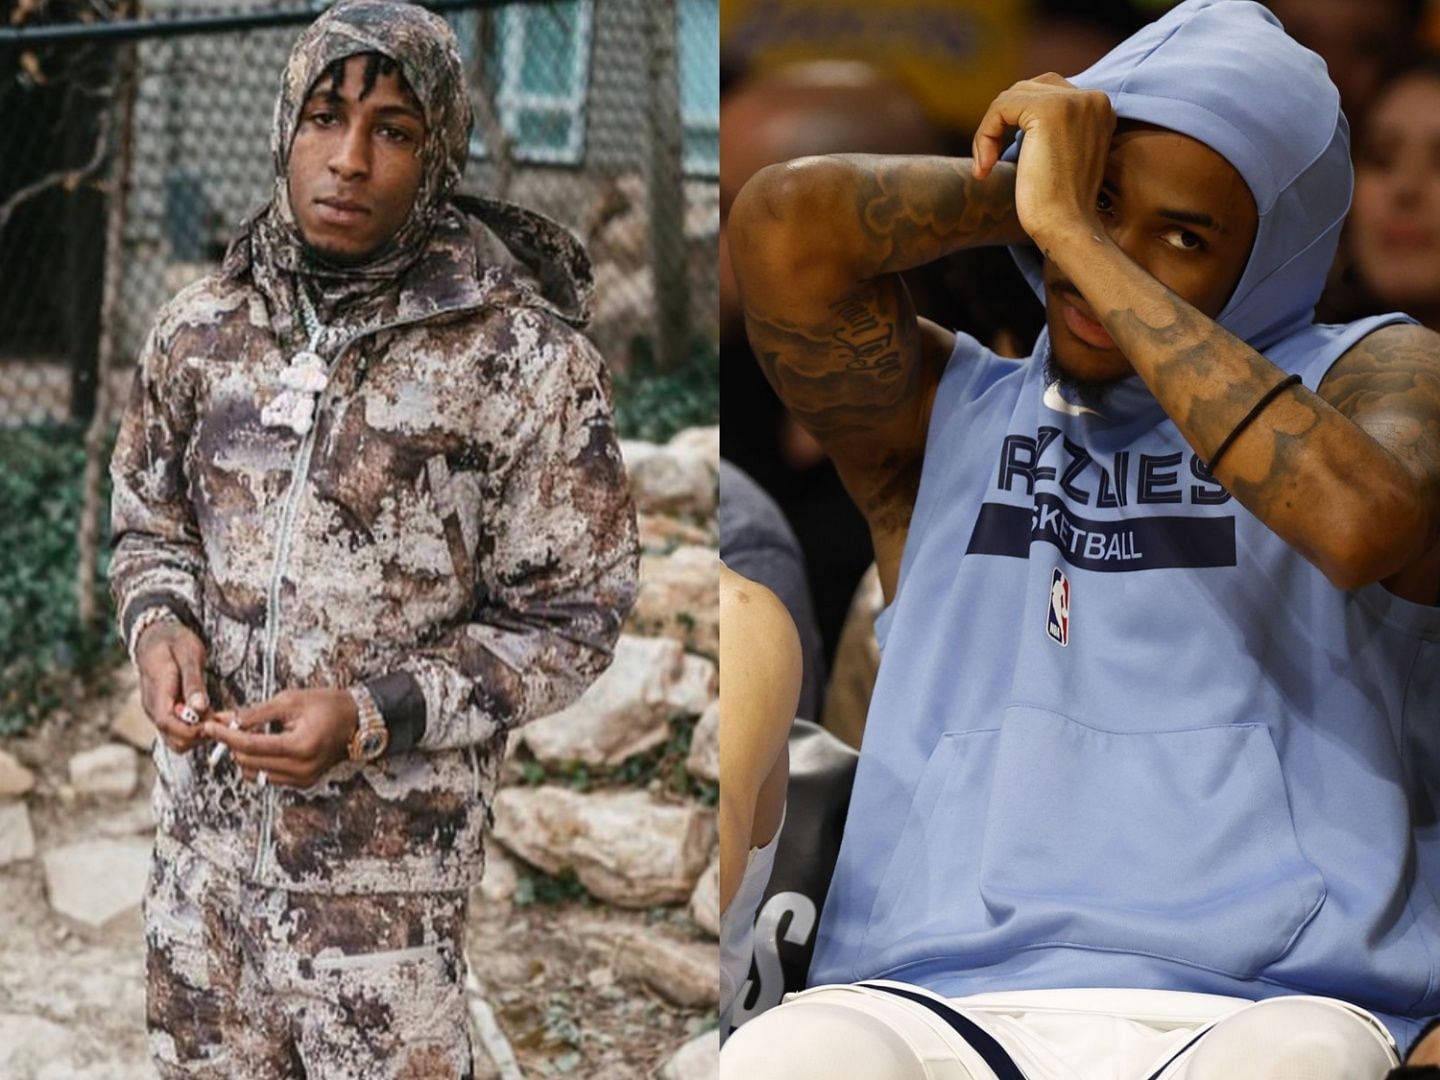 NBA YoungBoy and Ja Morant of the Memphis Grizzlies. (Left Photo: NeverBrokeAgainLLC/Instagram)